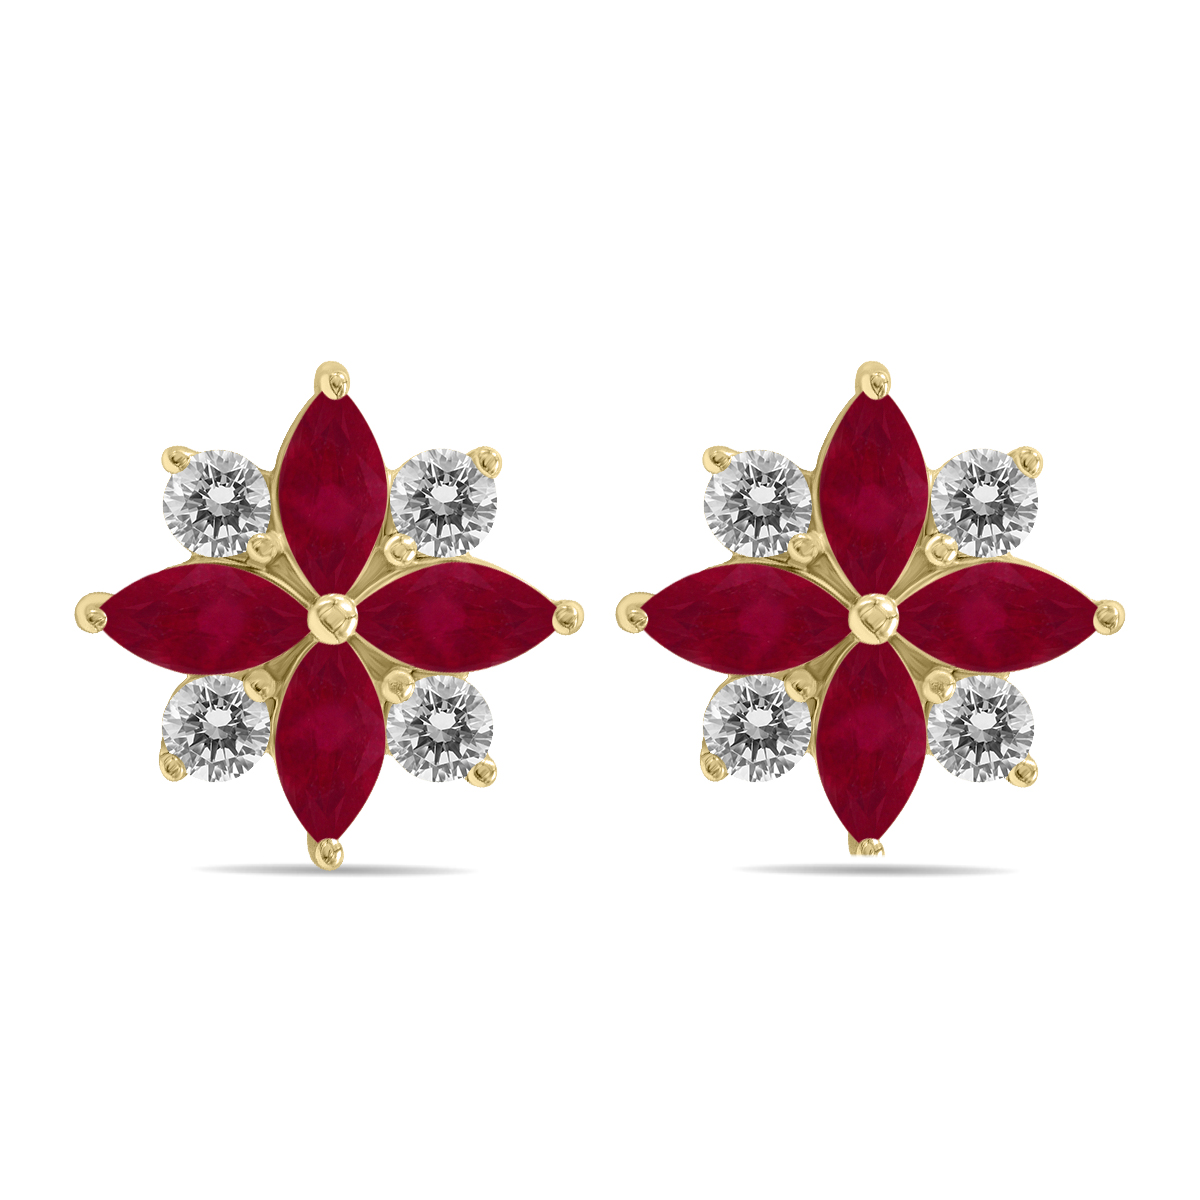 Image of 1 Carat TW Ruby and Diamond Flower Earrings in 10K Yellow Gold